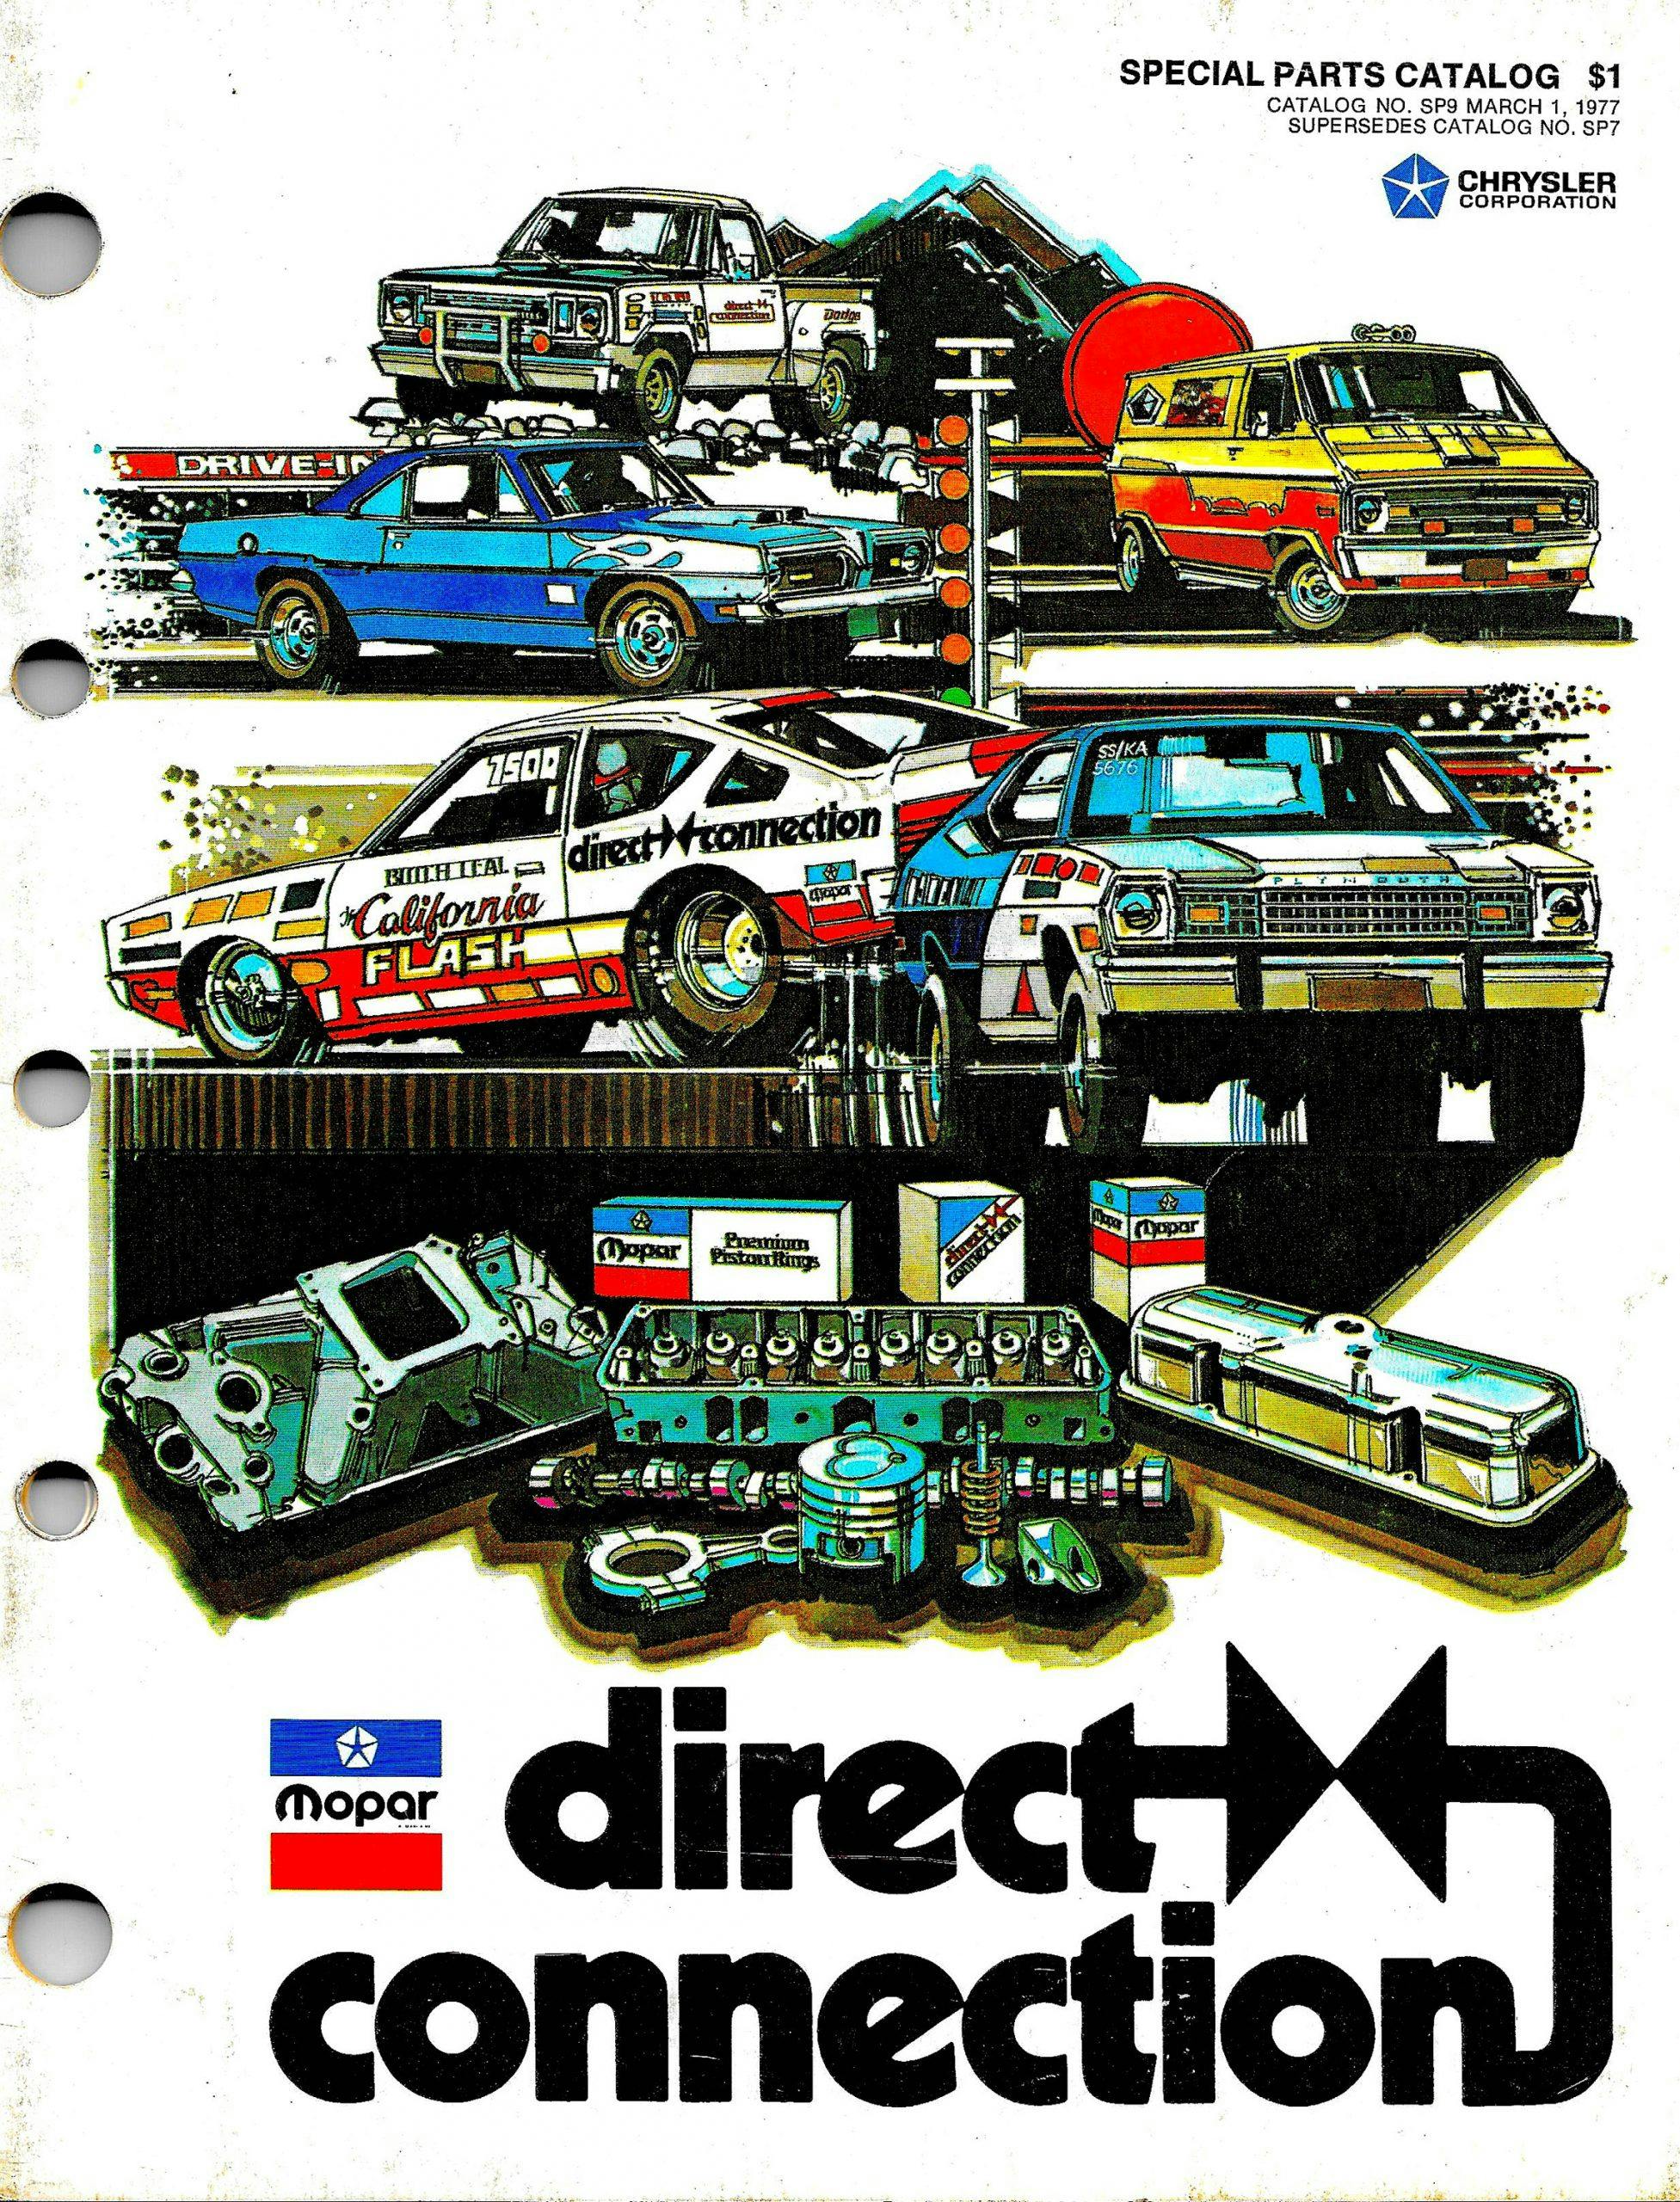 1977 Direct Connection parts catalog cover. The Dodge brand’s